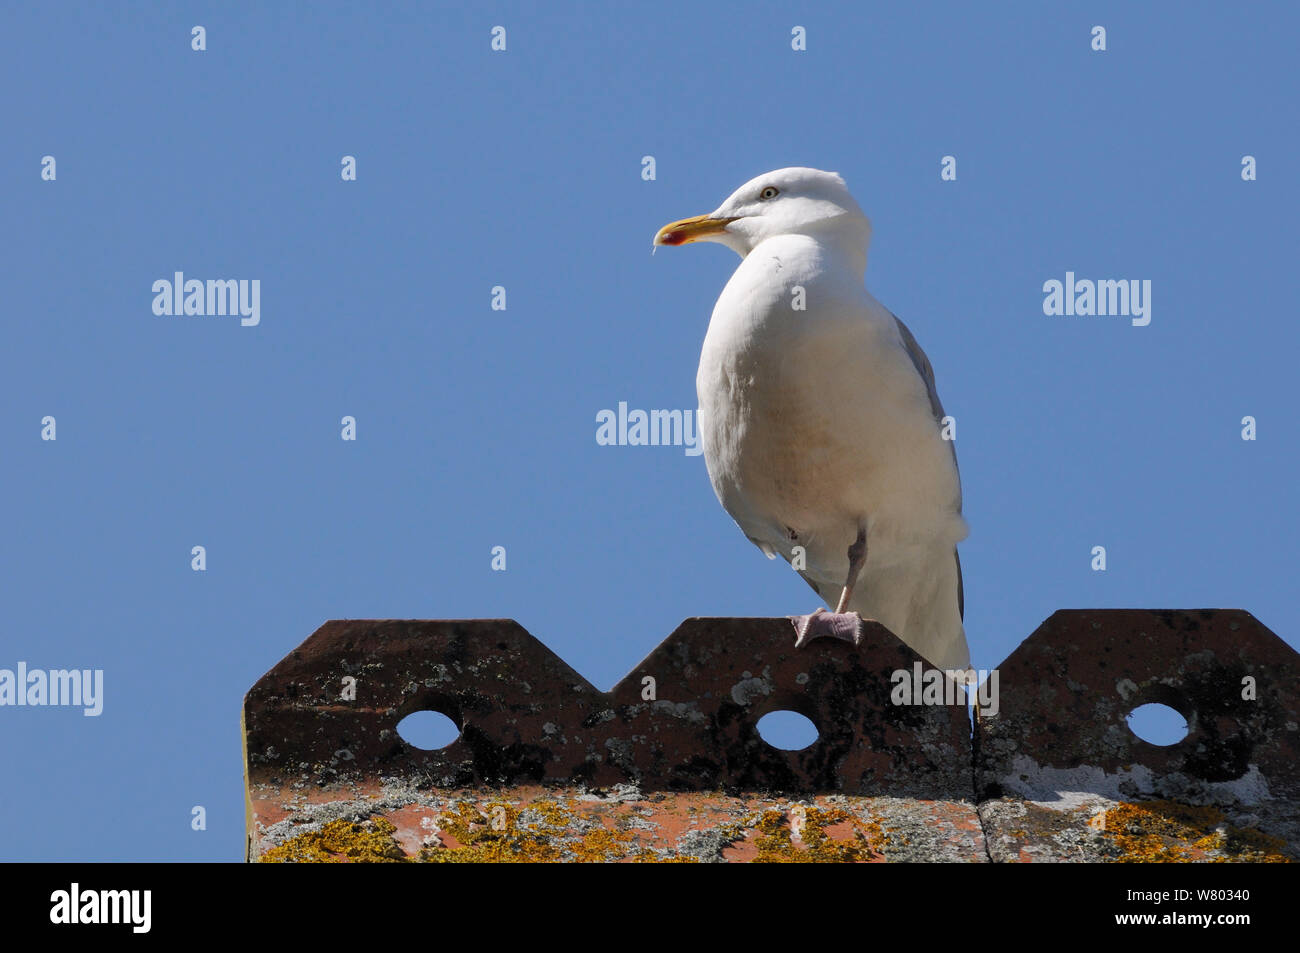 Adult Herring gull (Larus argentatus) standing on one leg on rooftop, Looe, Cornwall, UK, June. Editorial use only. Stock Photo